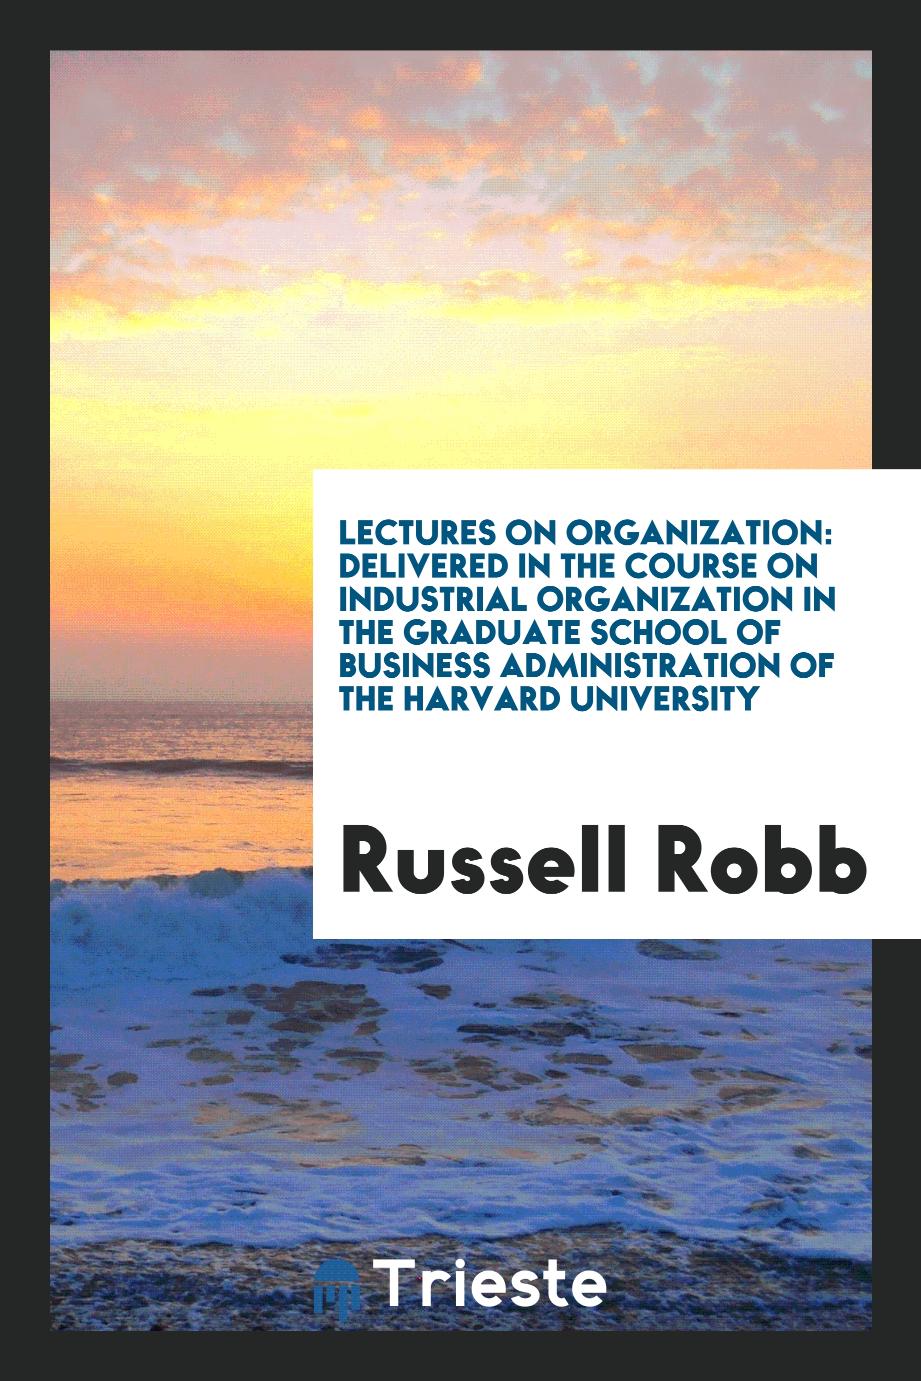 Lectures on Organization: Delivered in the Course on Industrial Organization in the graduate school of business administration of the Harvard University